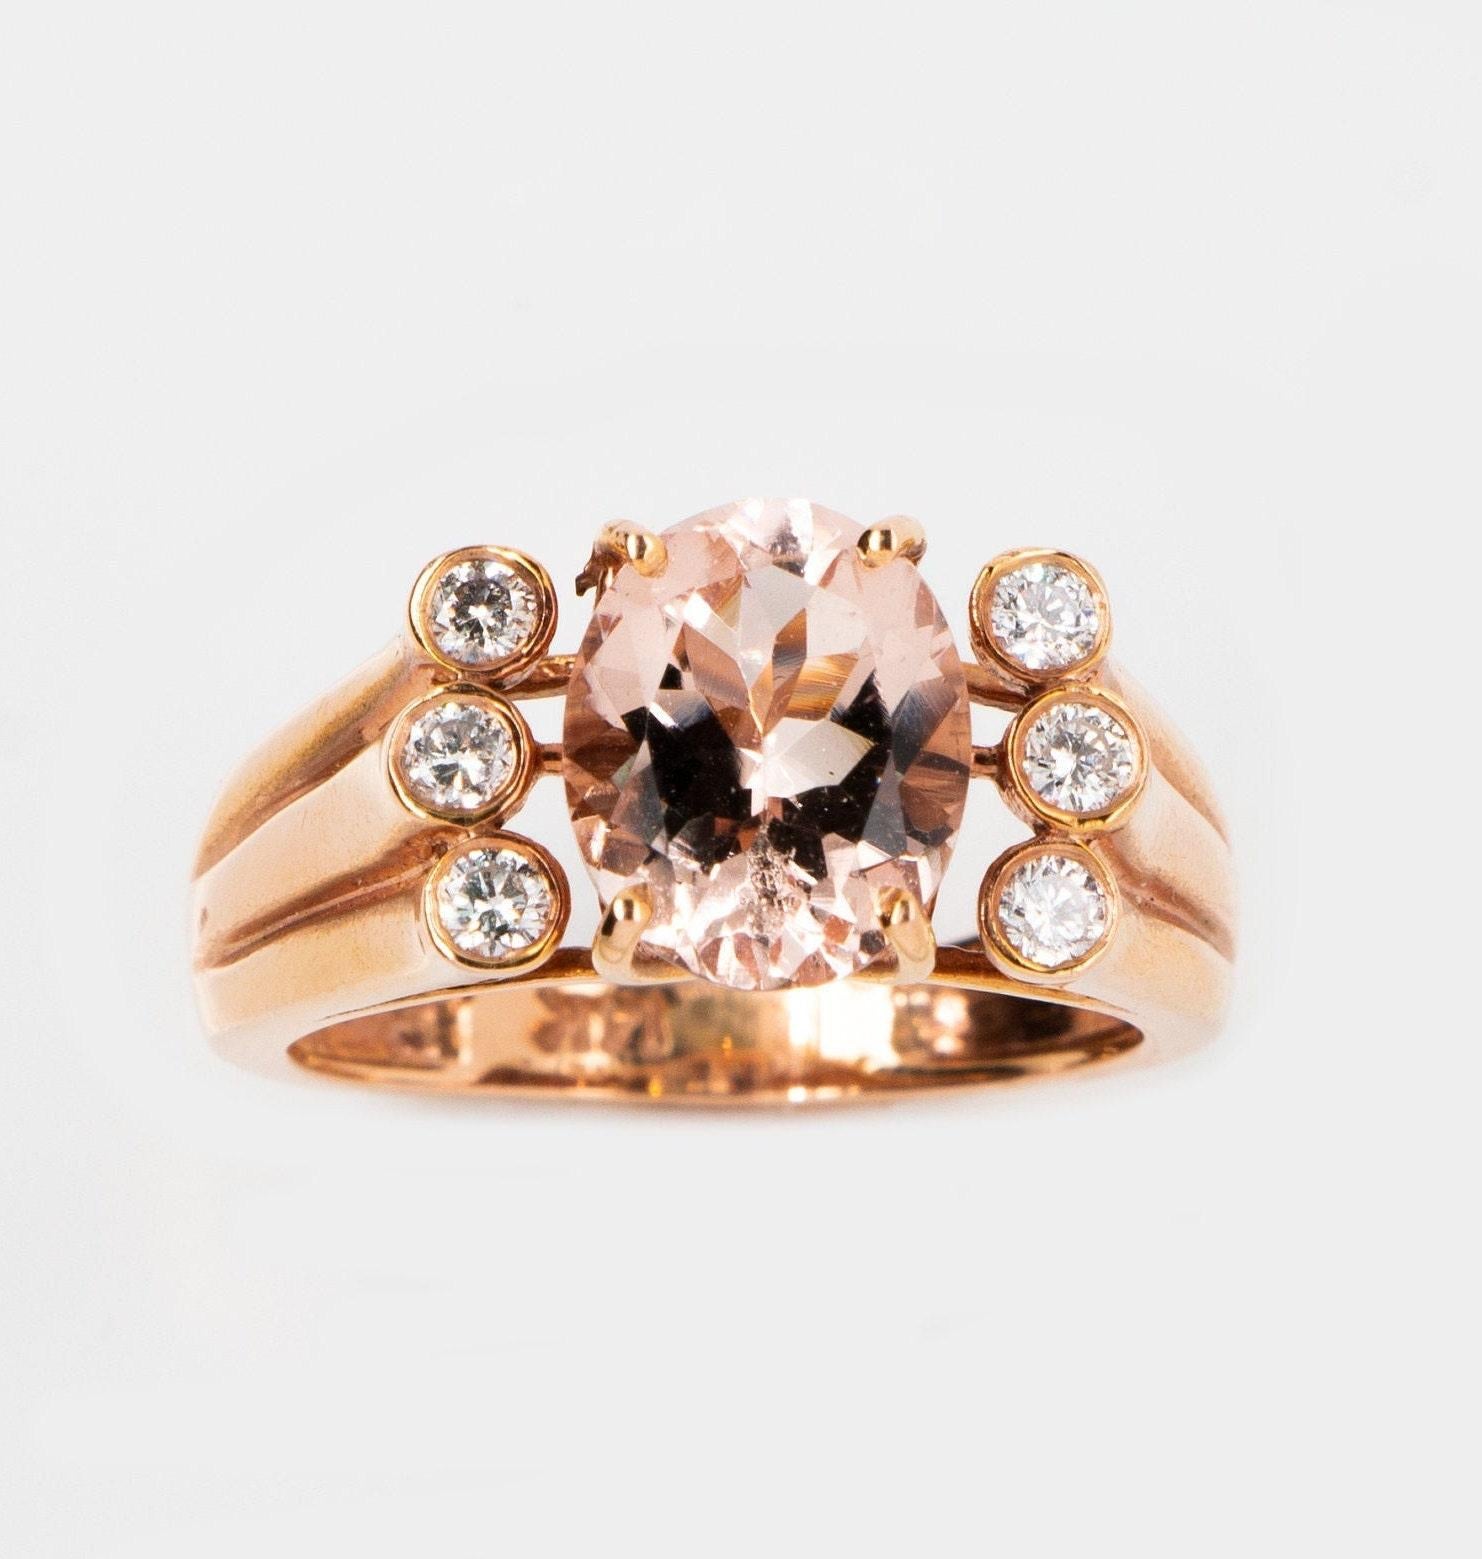 This is a unique and magnificent natural morganite and diamond  ring set in solid 14K rose gold. The vivid 10X8MM 2.40 carat Morganite oval has an excellent peachy pink color (AAA quality gem) and is set on top of a gorgeous curved band that has 6